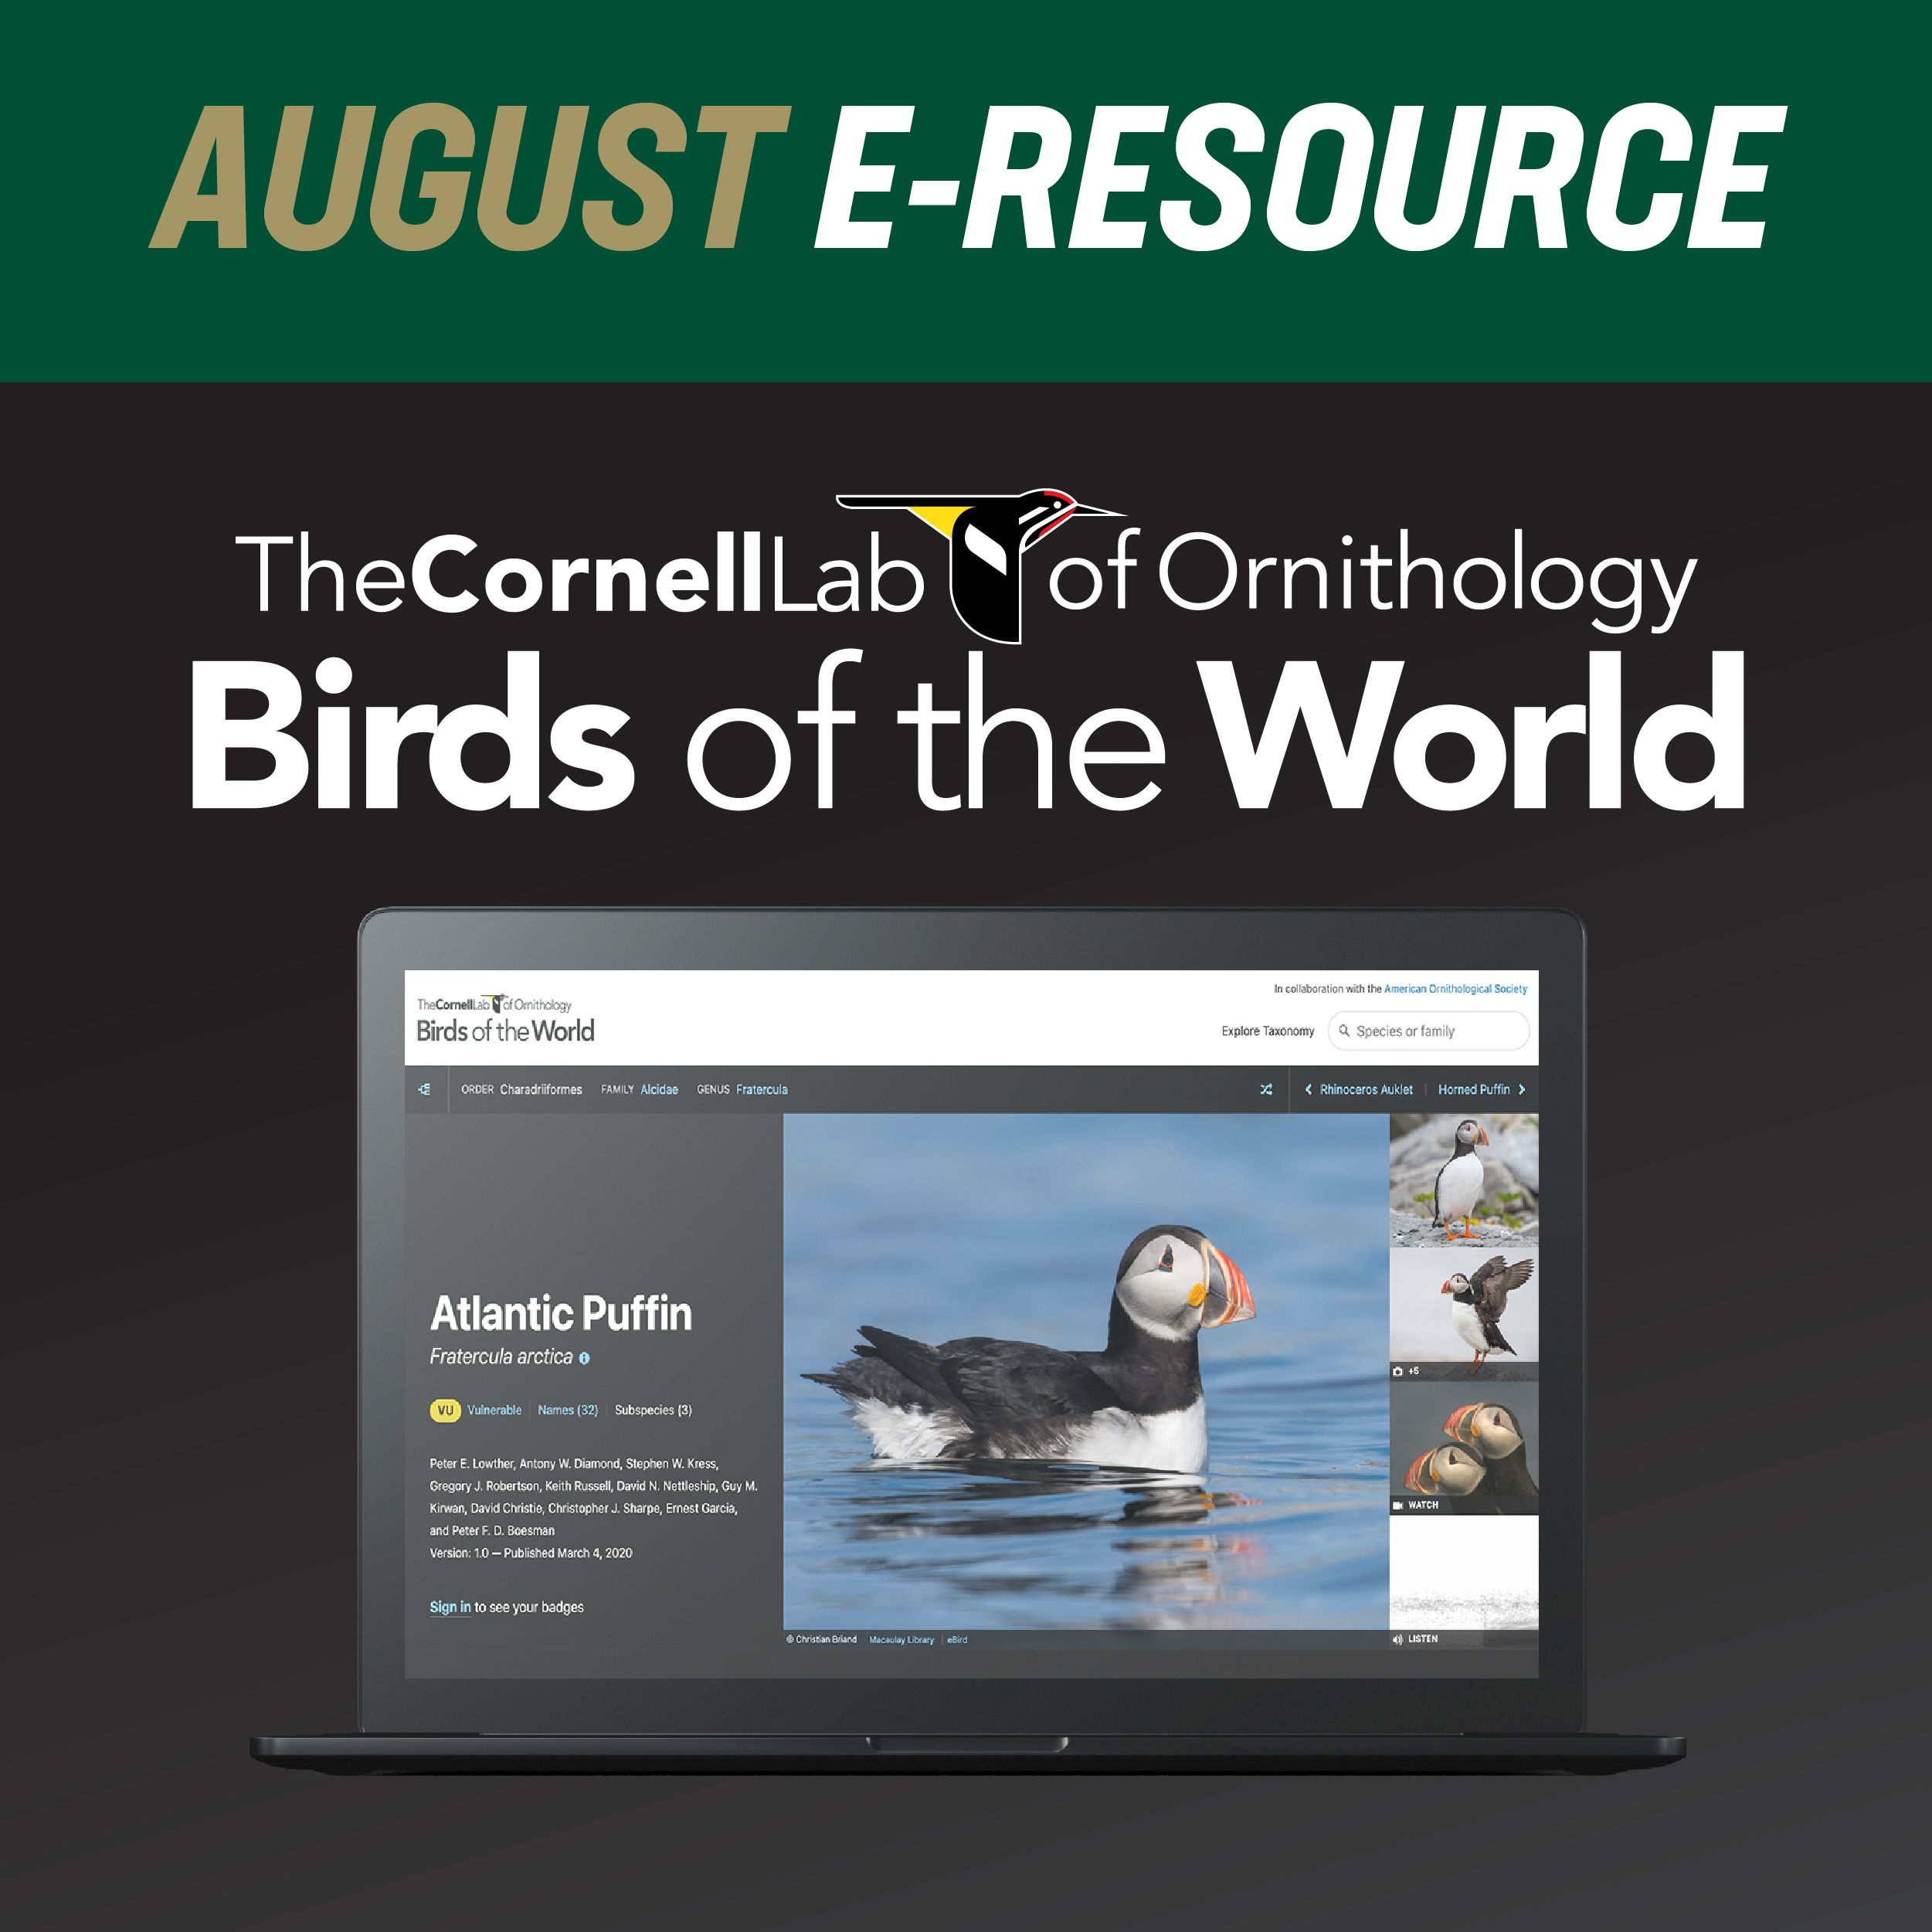 Graphic announcing the August e-resource for the month, birds of the world